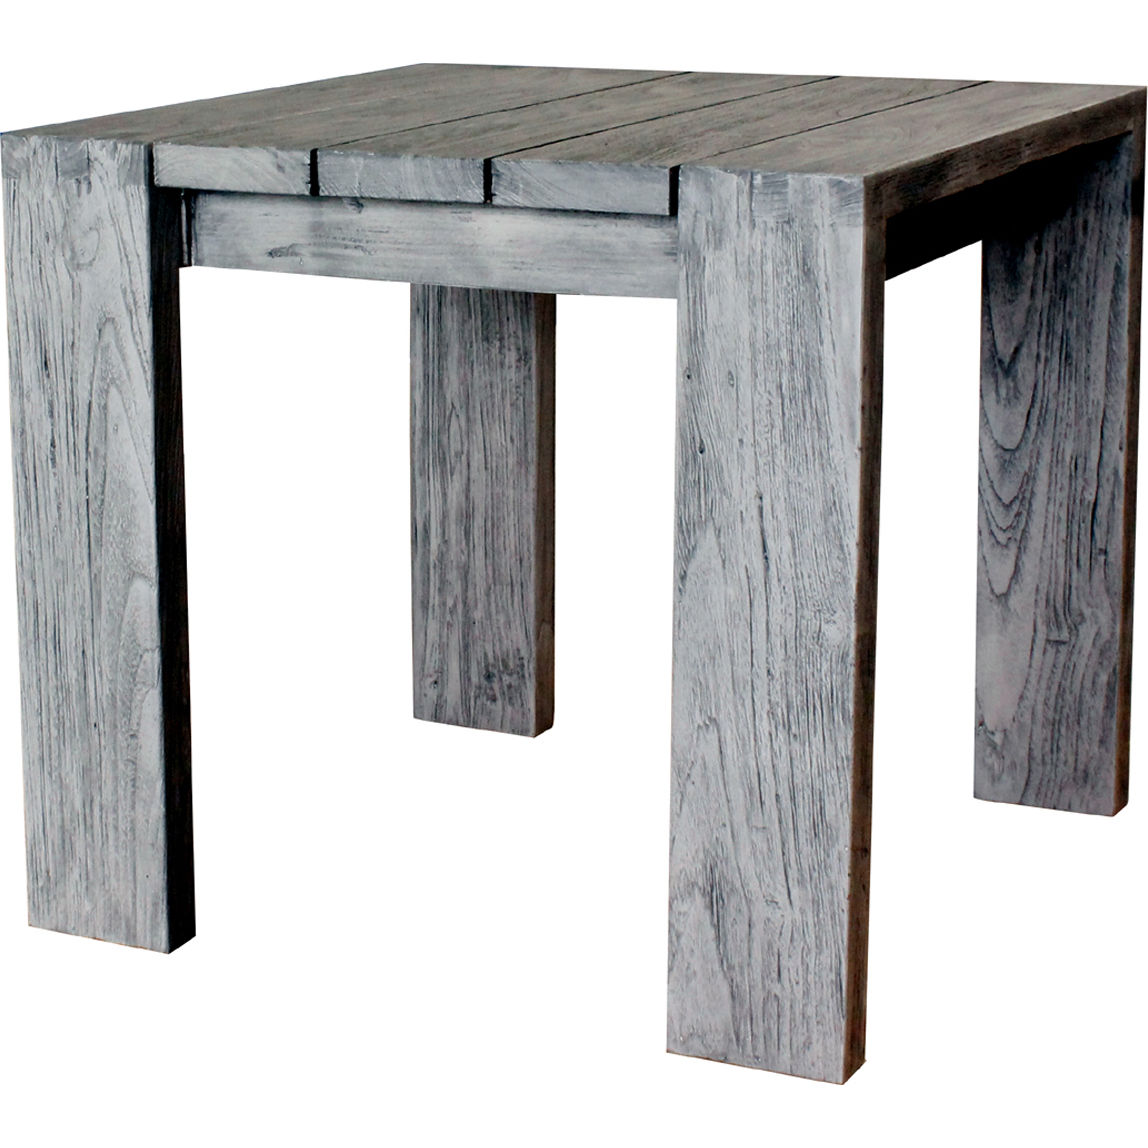 Padma S Plantation Ol Ral06 Ralph Outdoor End Table In Reclaimed Teak